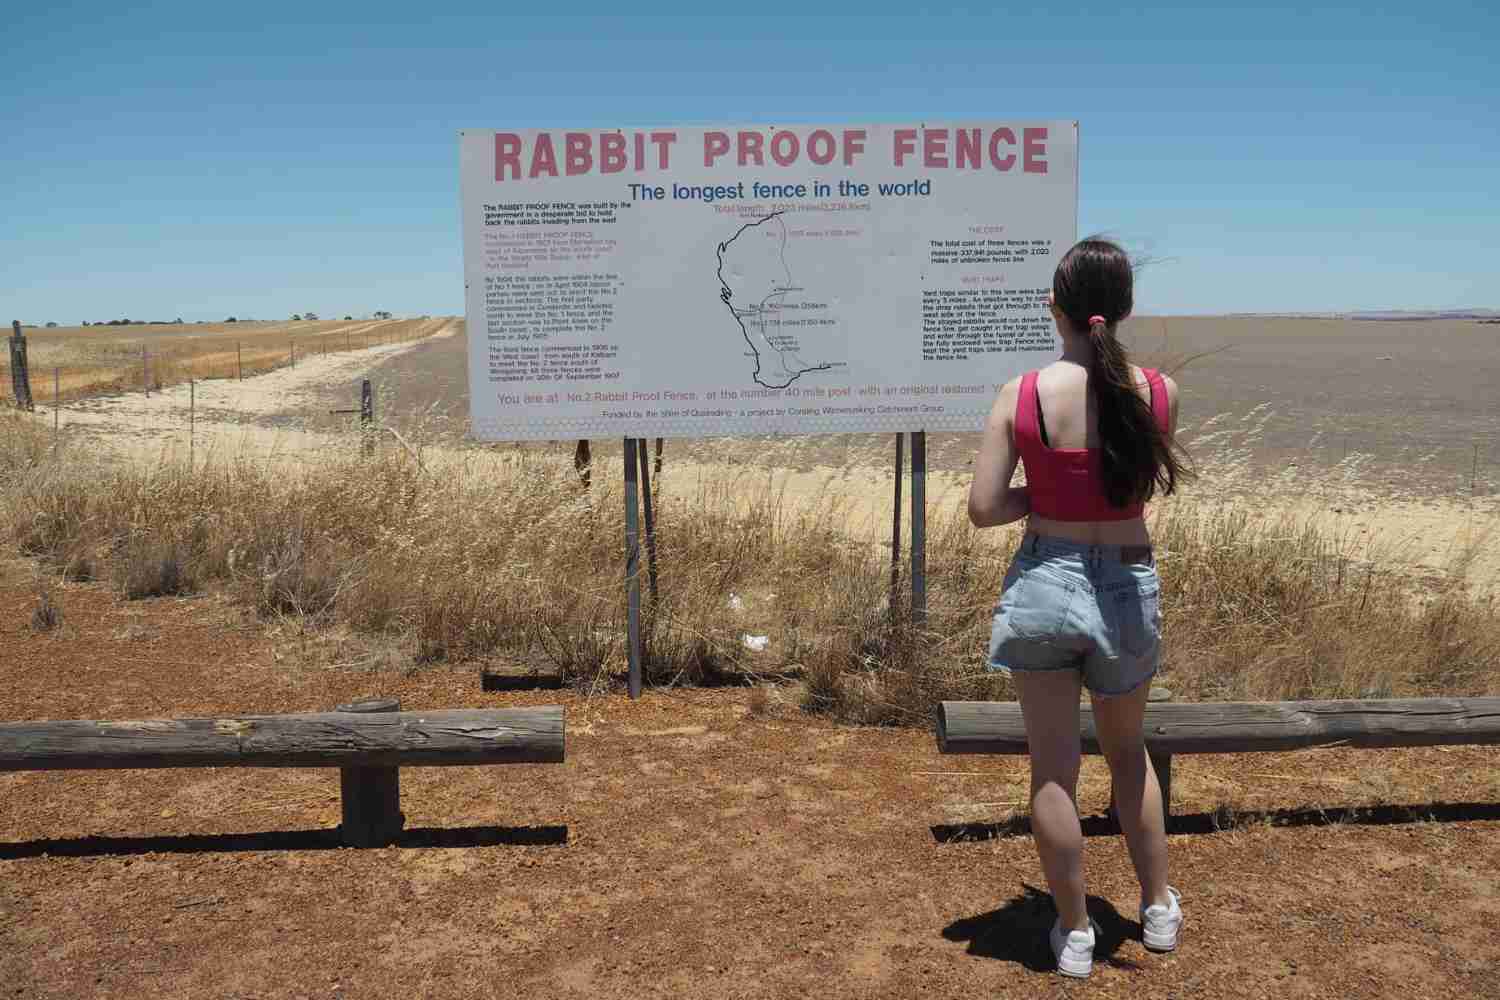 The Rabbit Proof Fence near Corrigan. This image shows the signage